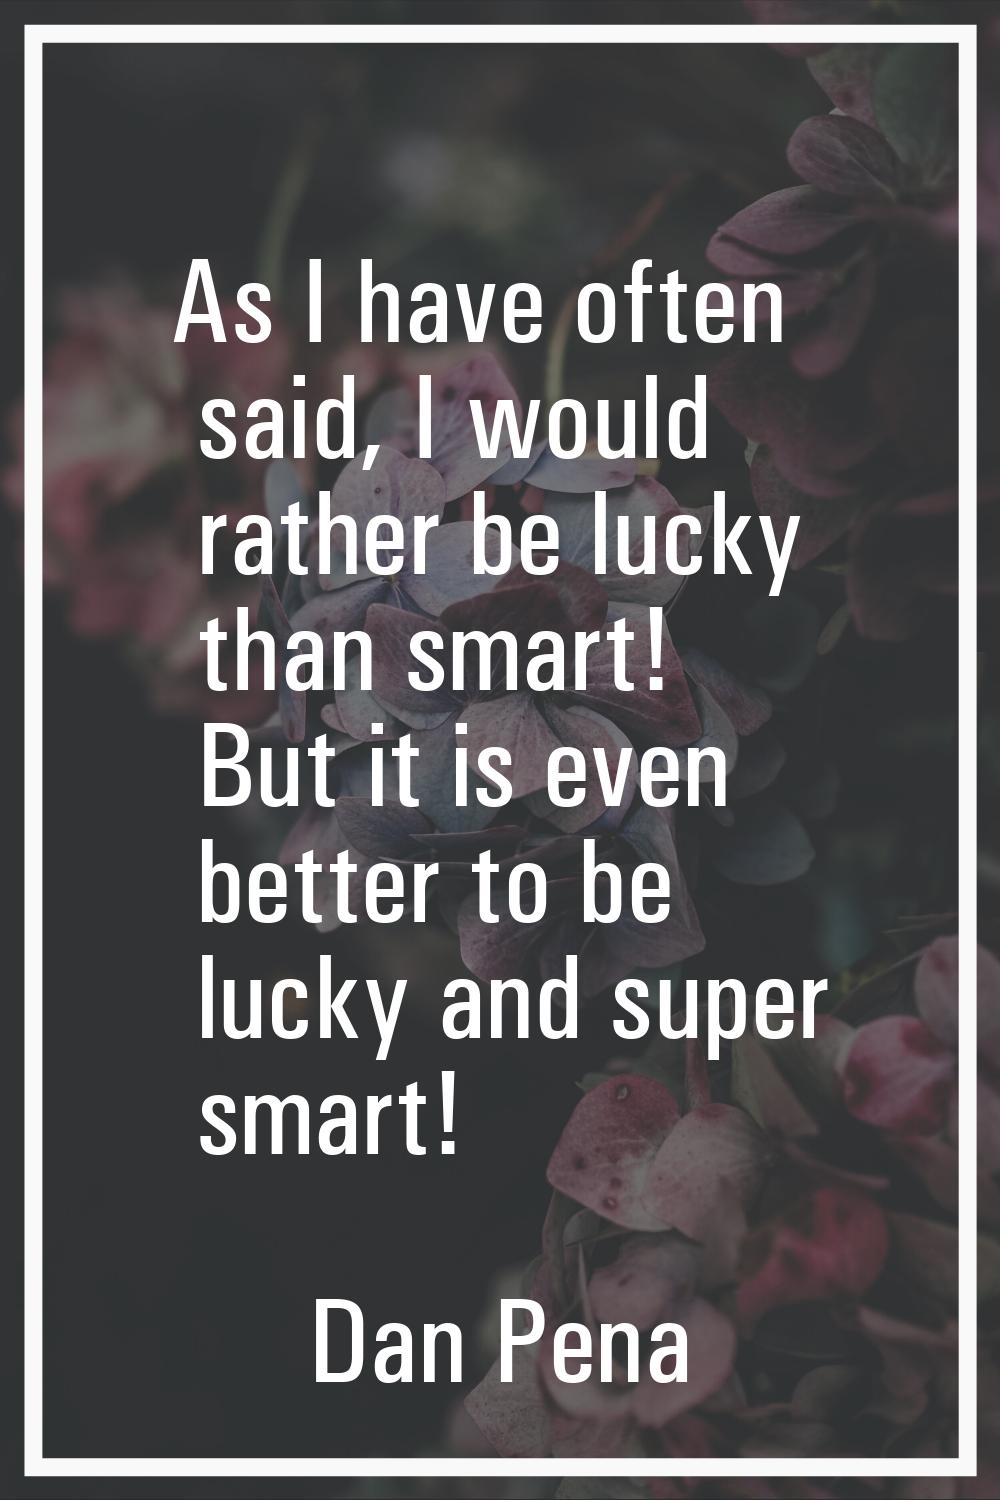 As I have often said, I would rather be lucky than smart! But it is even better to be lucky and sup